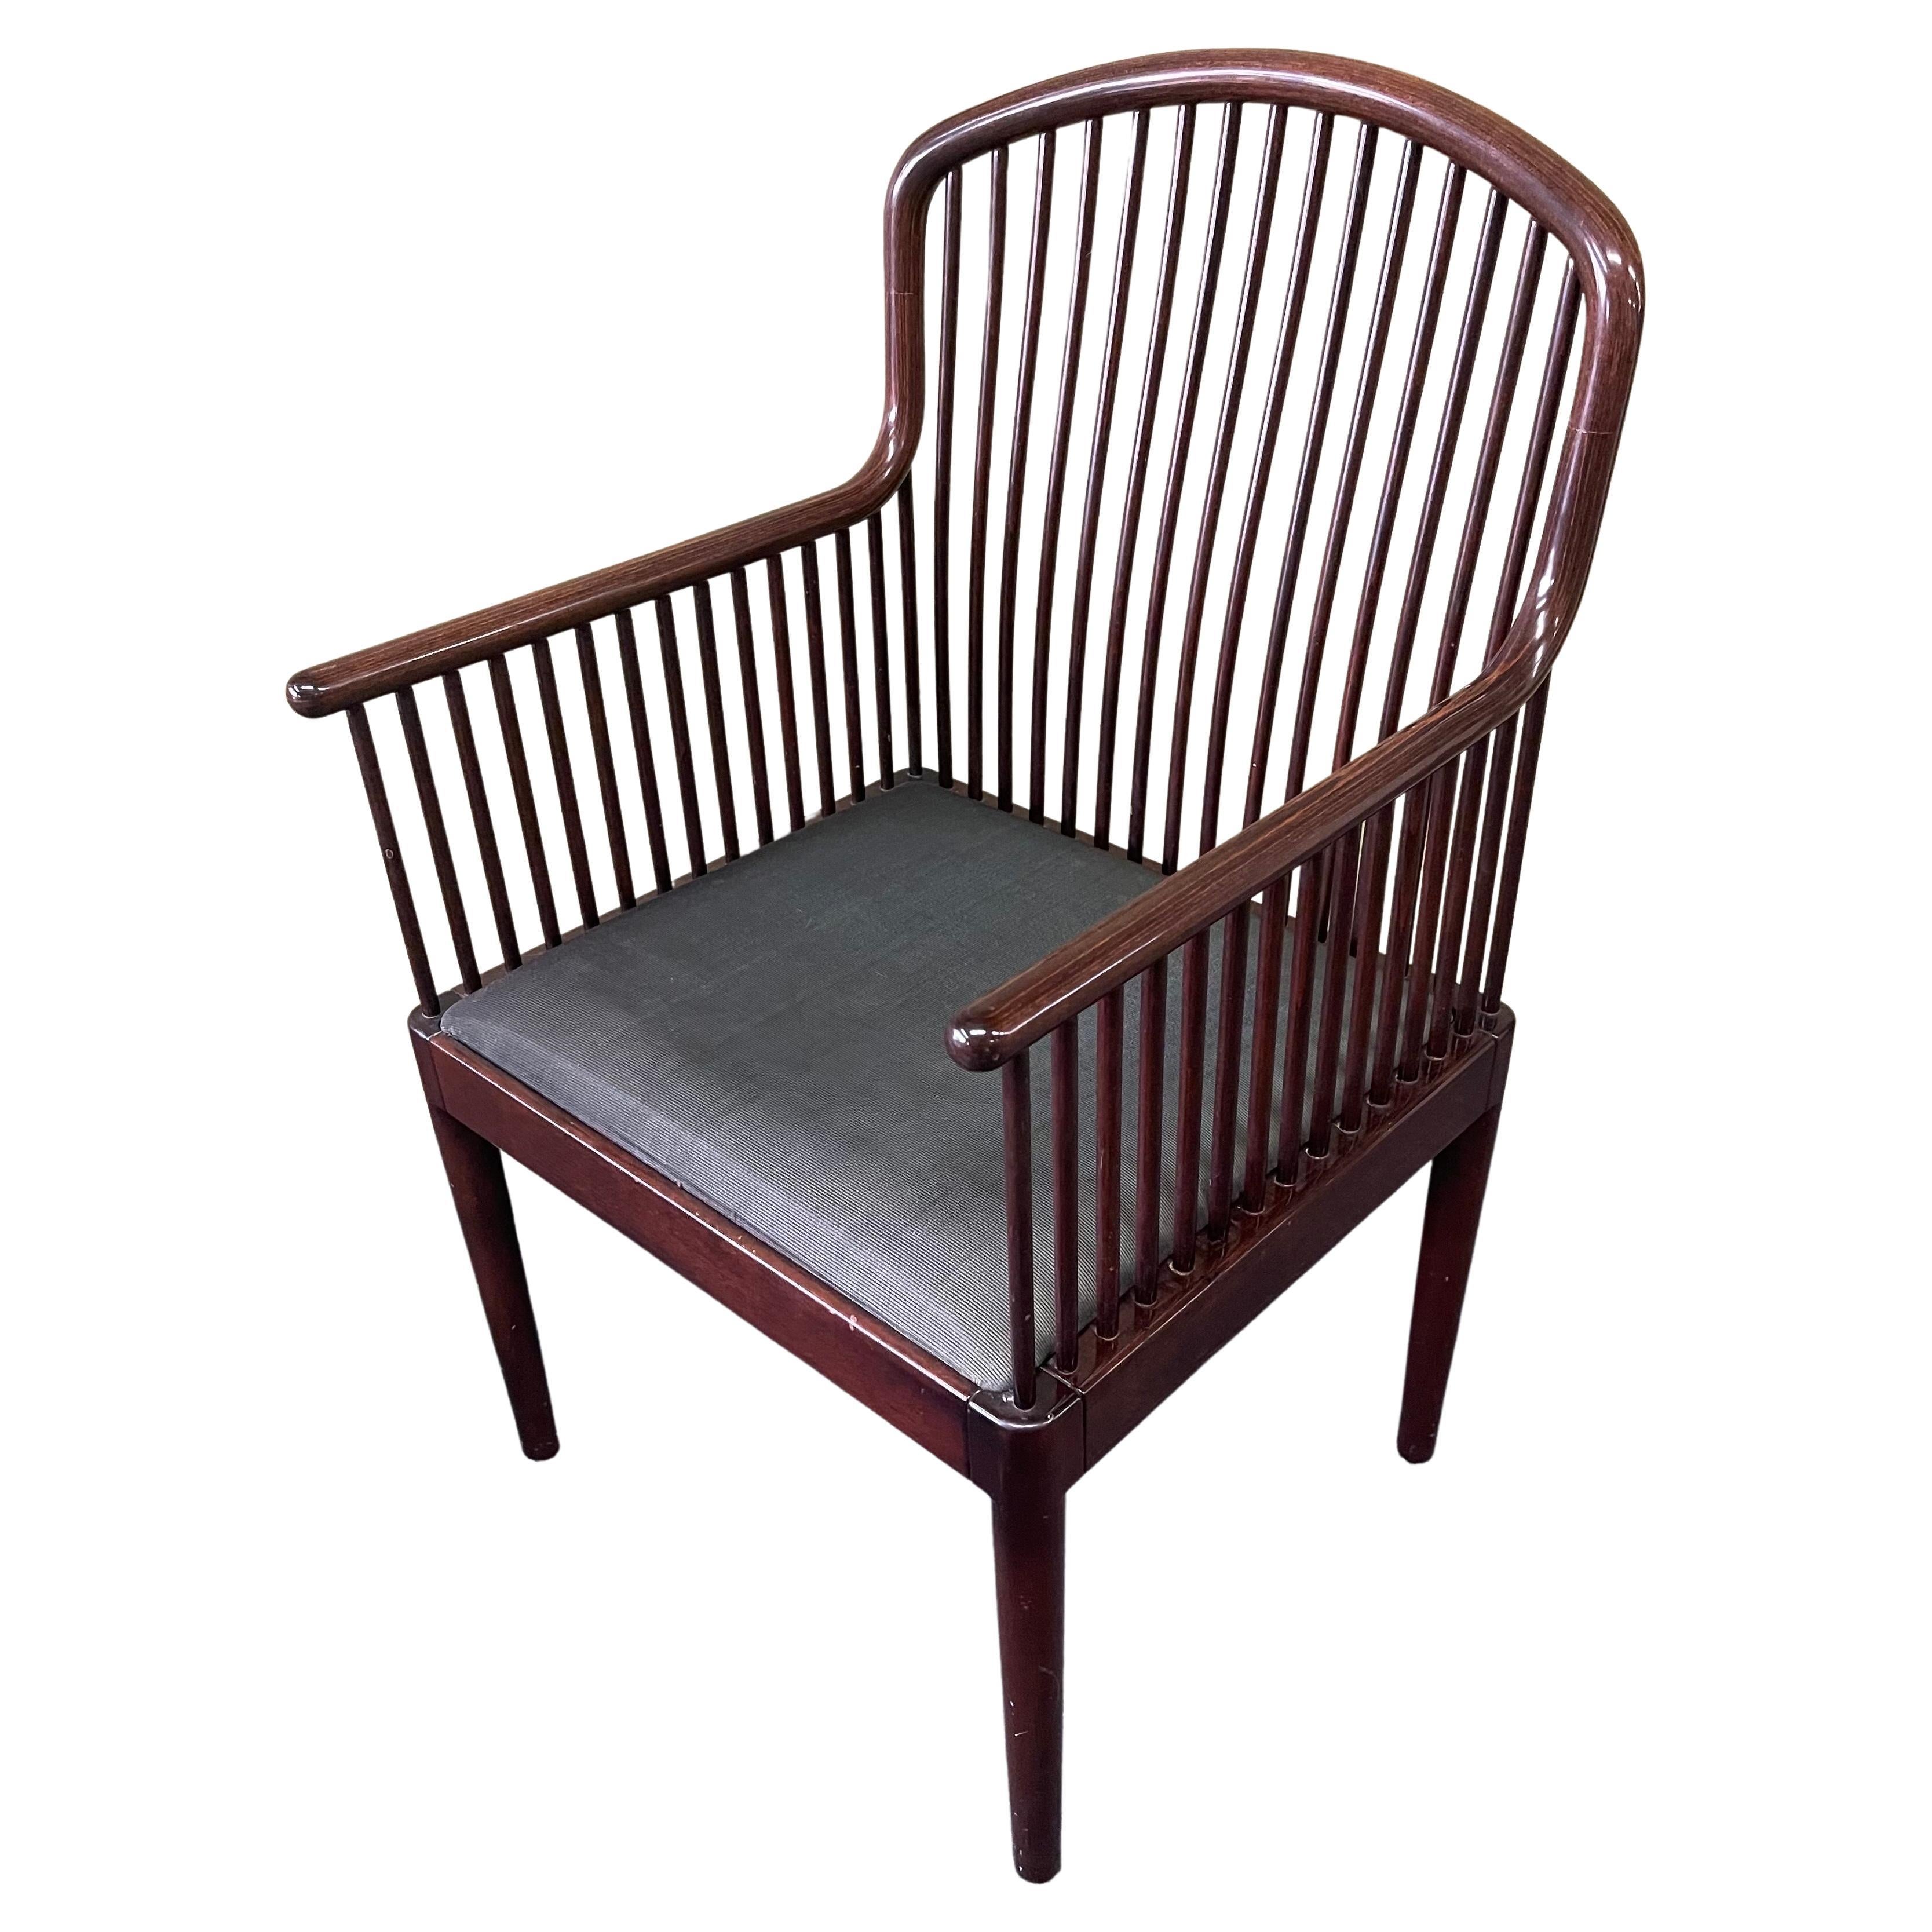 Andover Arm Chair in Rosewood by Davis Allen for Stendig